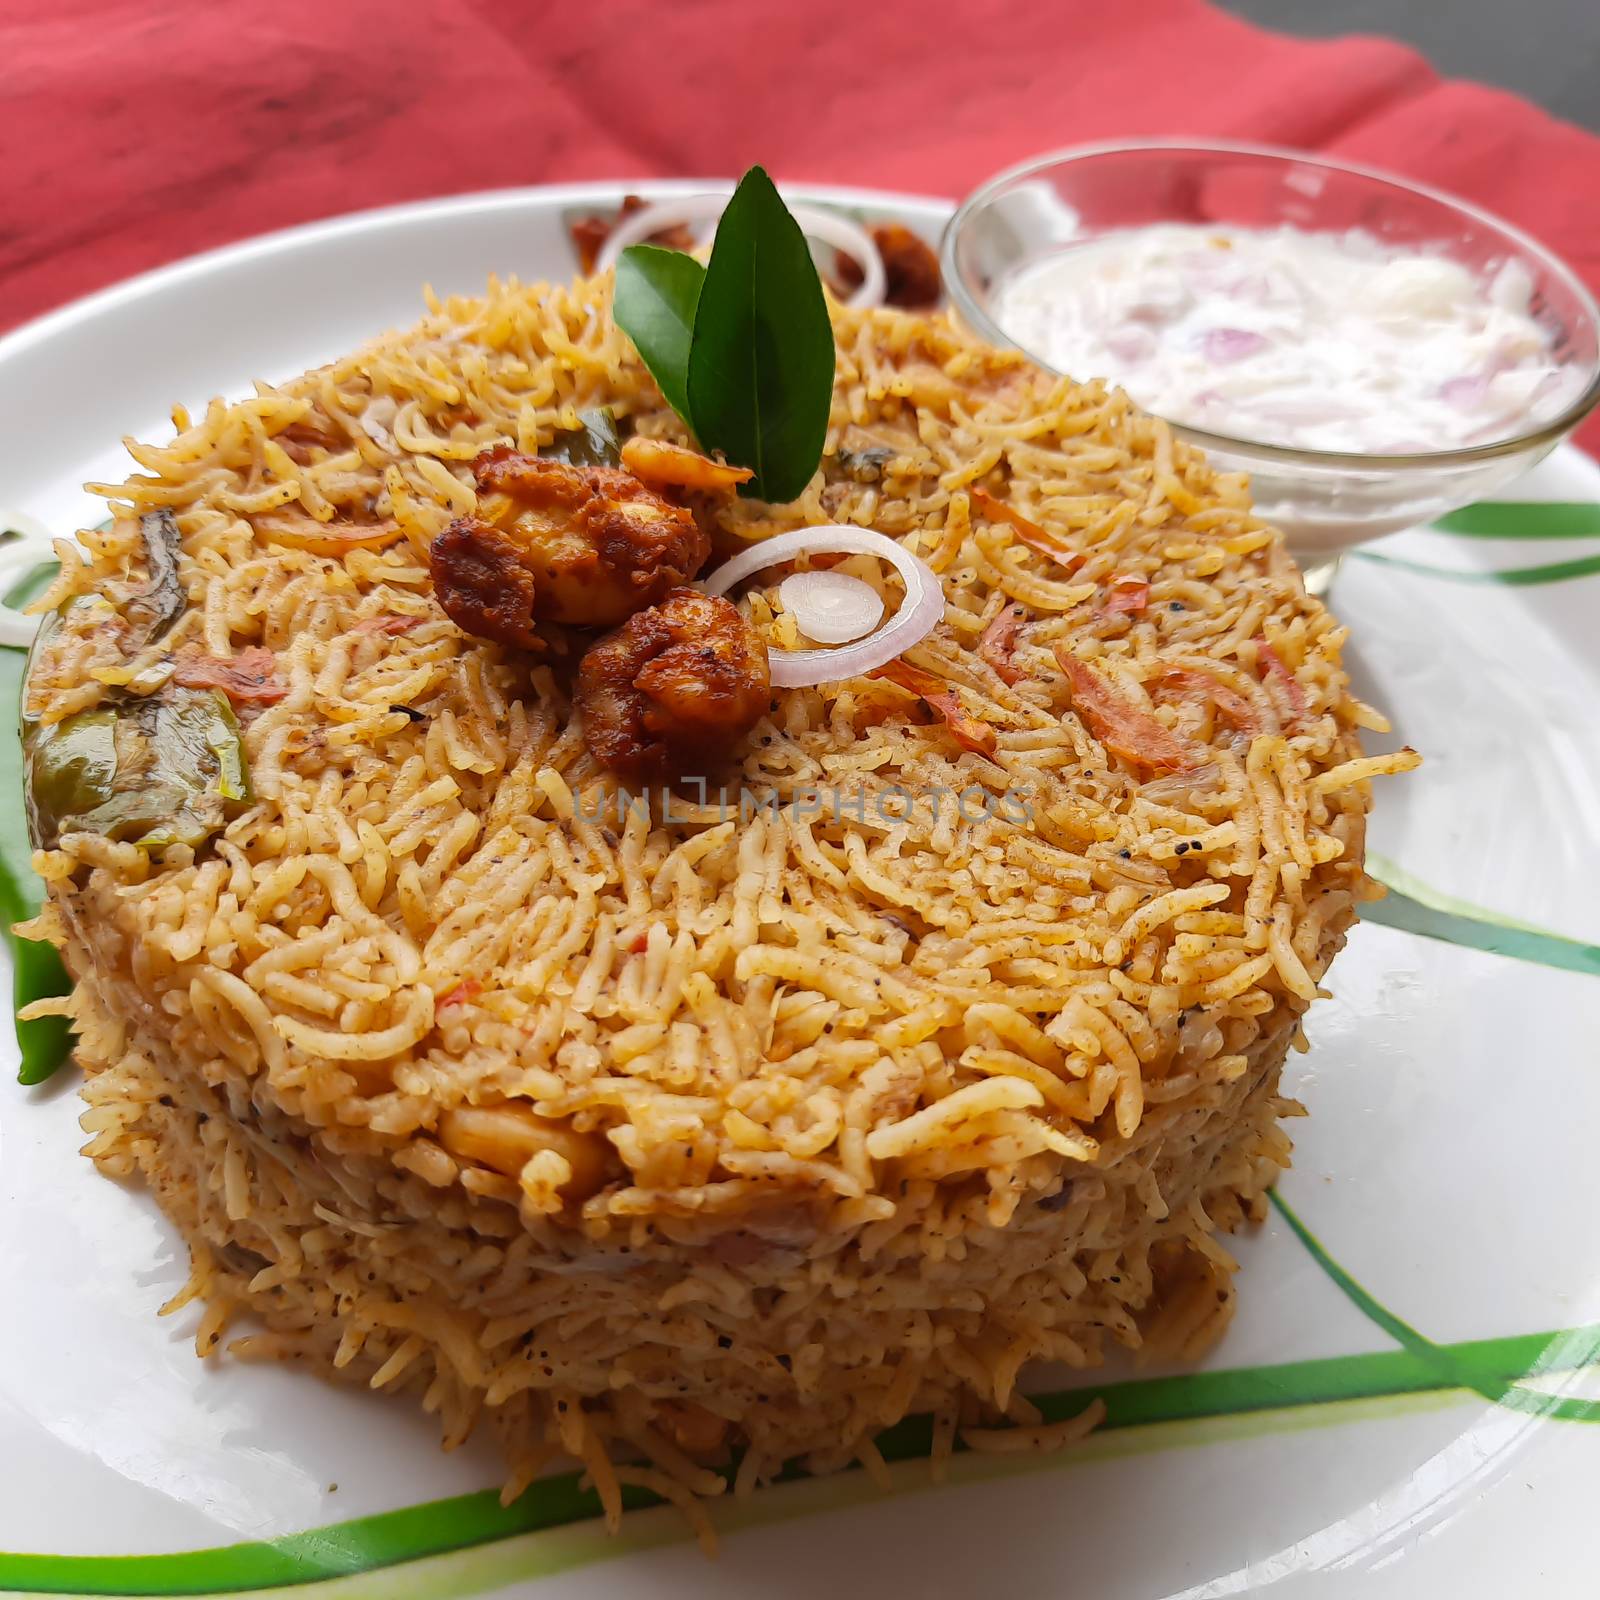 Colorful Delicious yummy prawn briyani with prawn fry in center with prawn fry and raita plated beautifully in white plate with bayleaf and it's one of favorite restaurant cuisine food by AnithaVikram